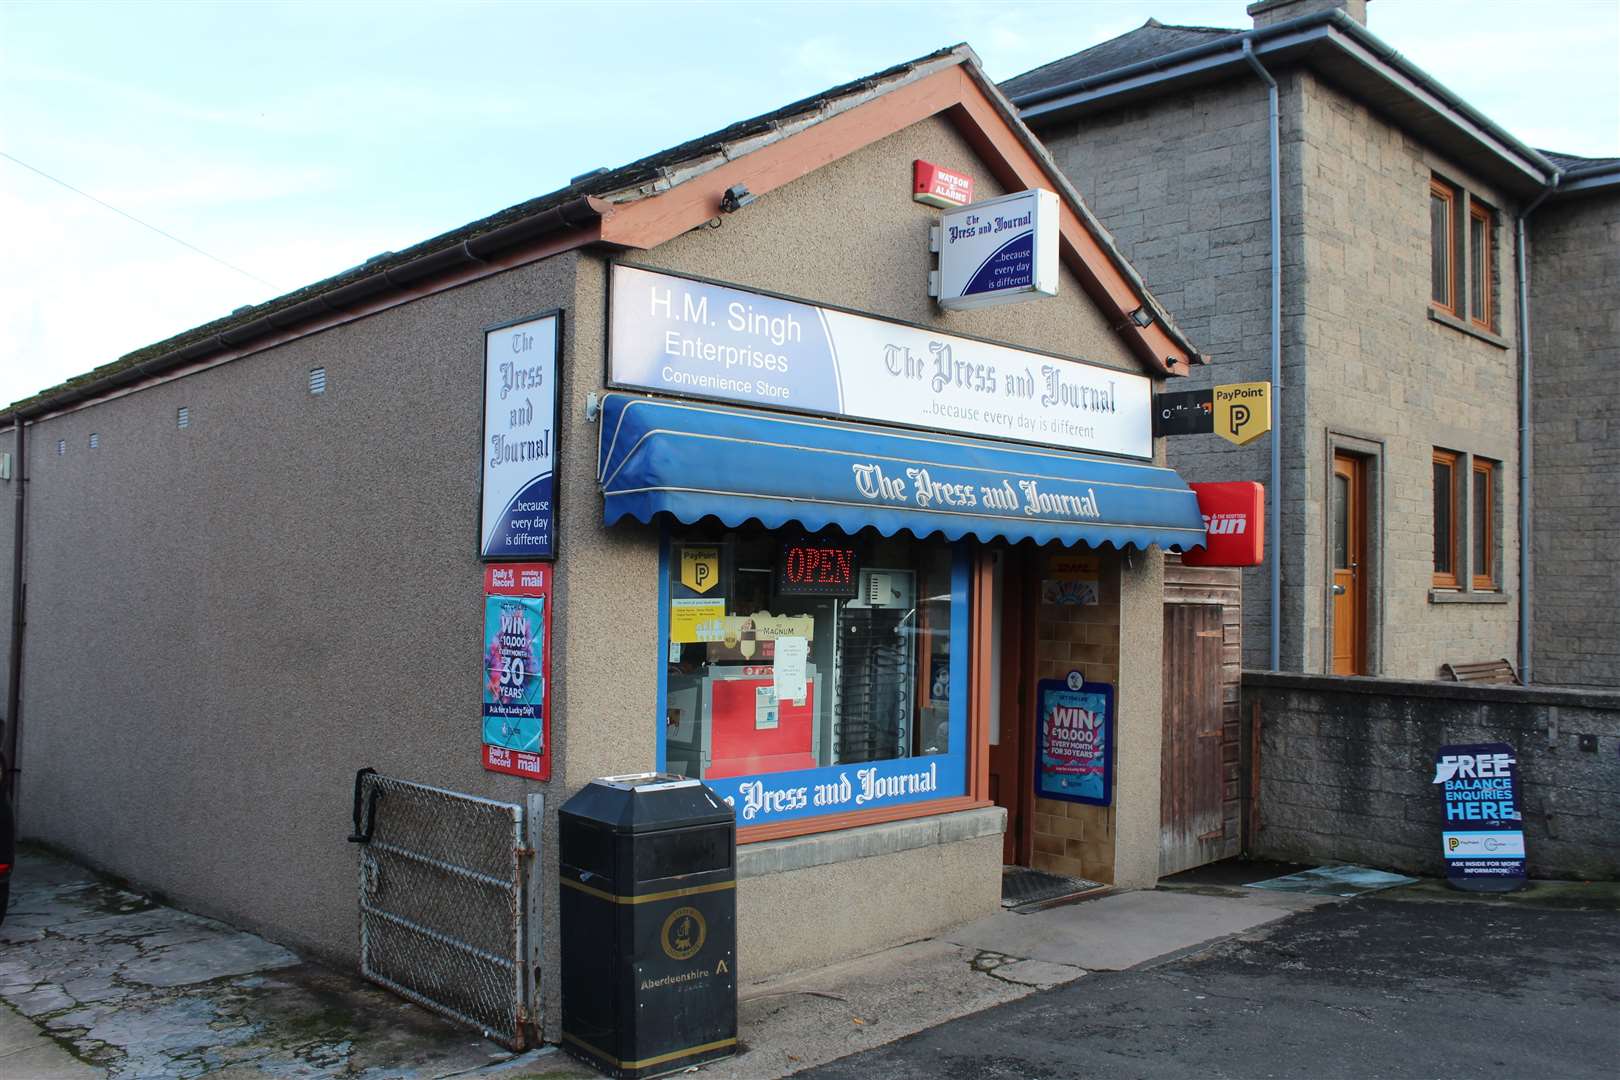 The Port Elphinstone paper shop will not be able to expand its alcohol provision.